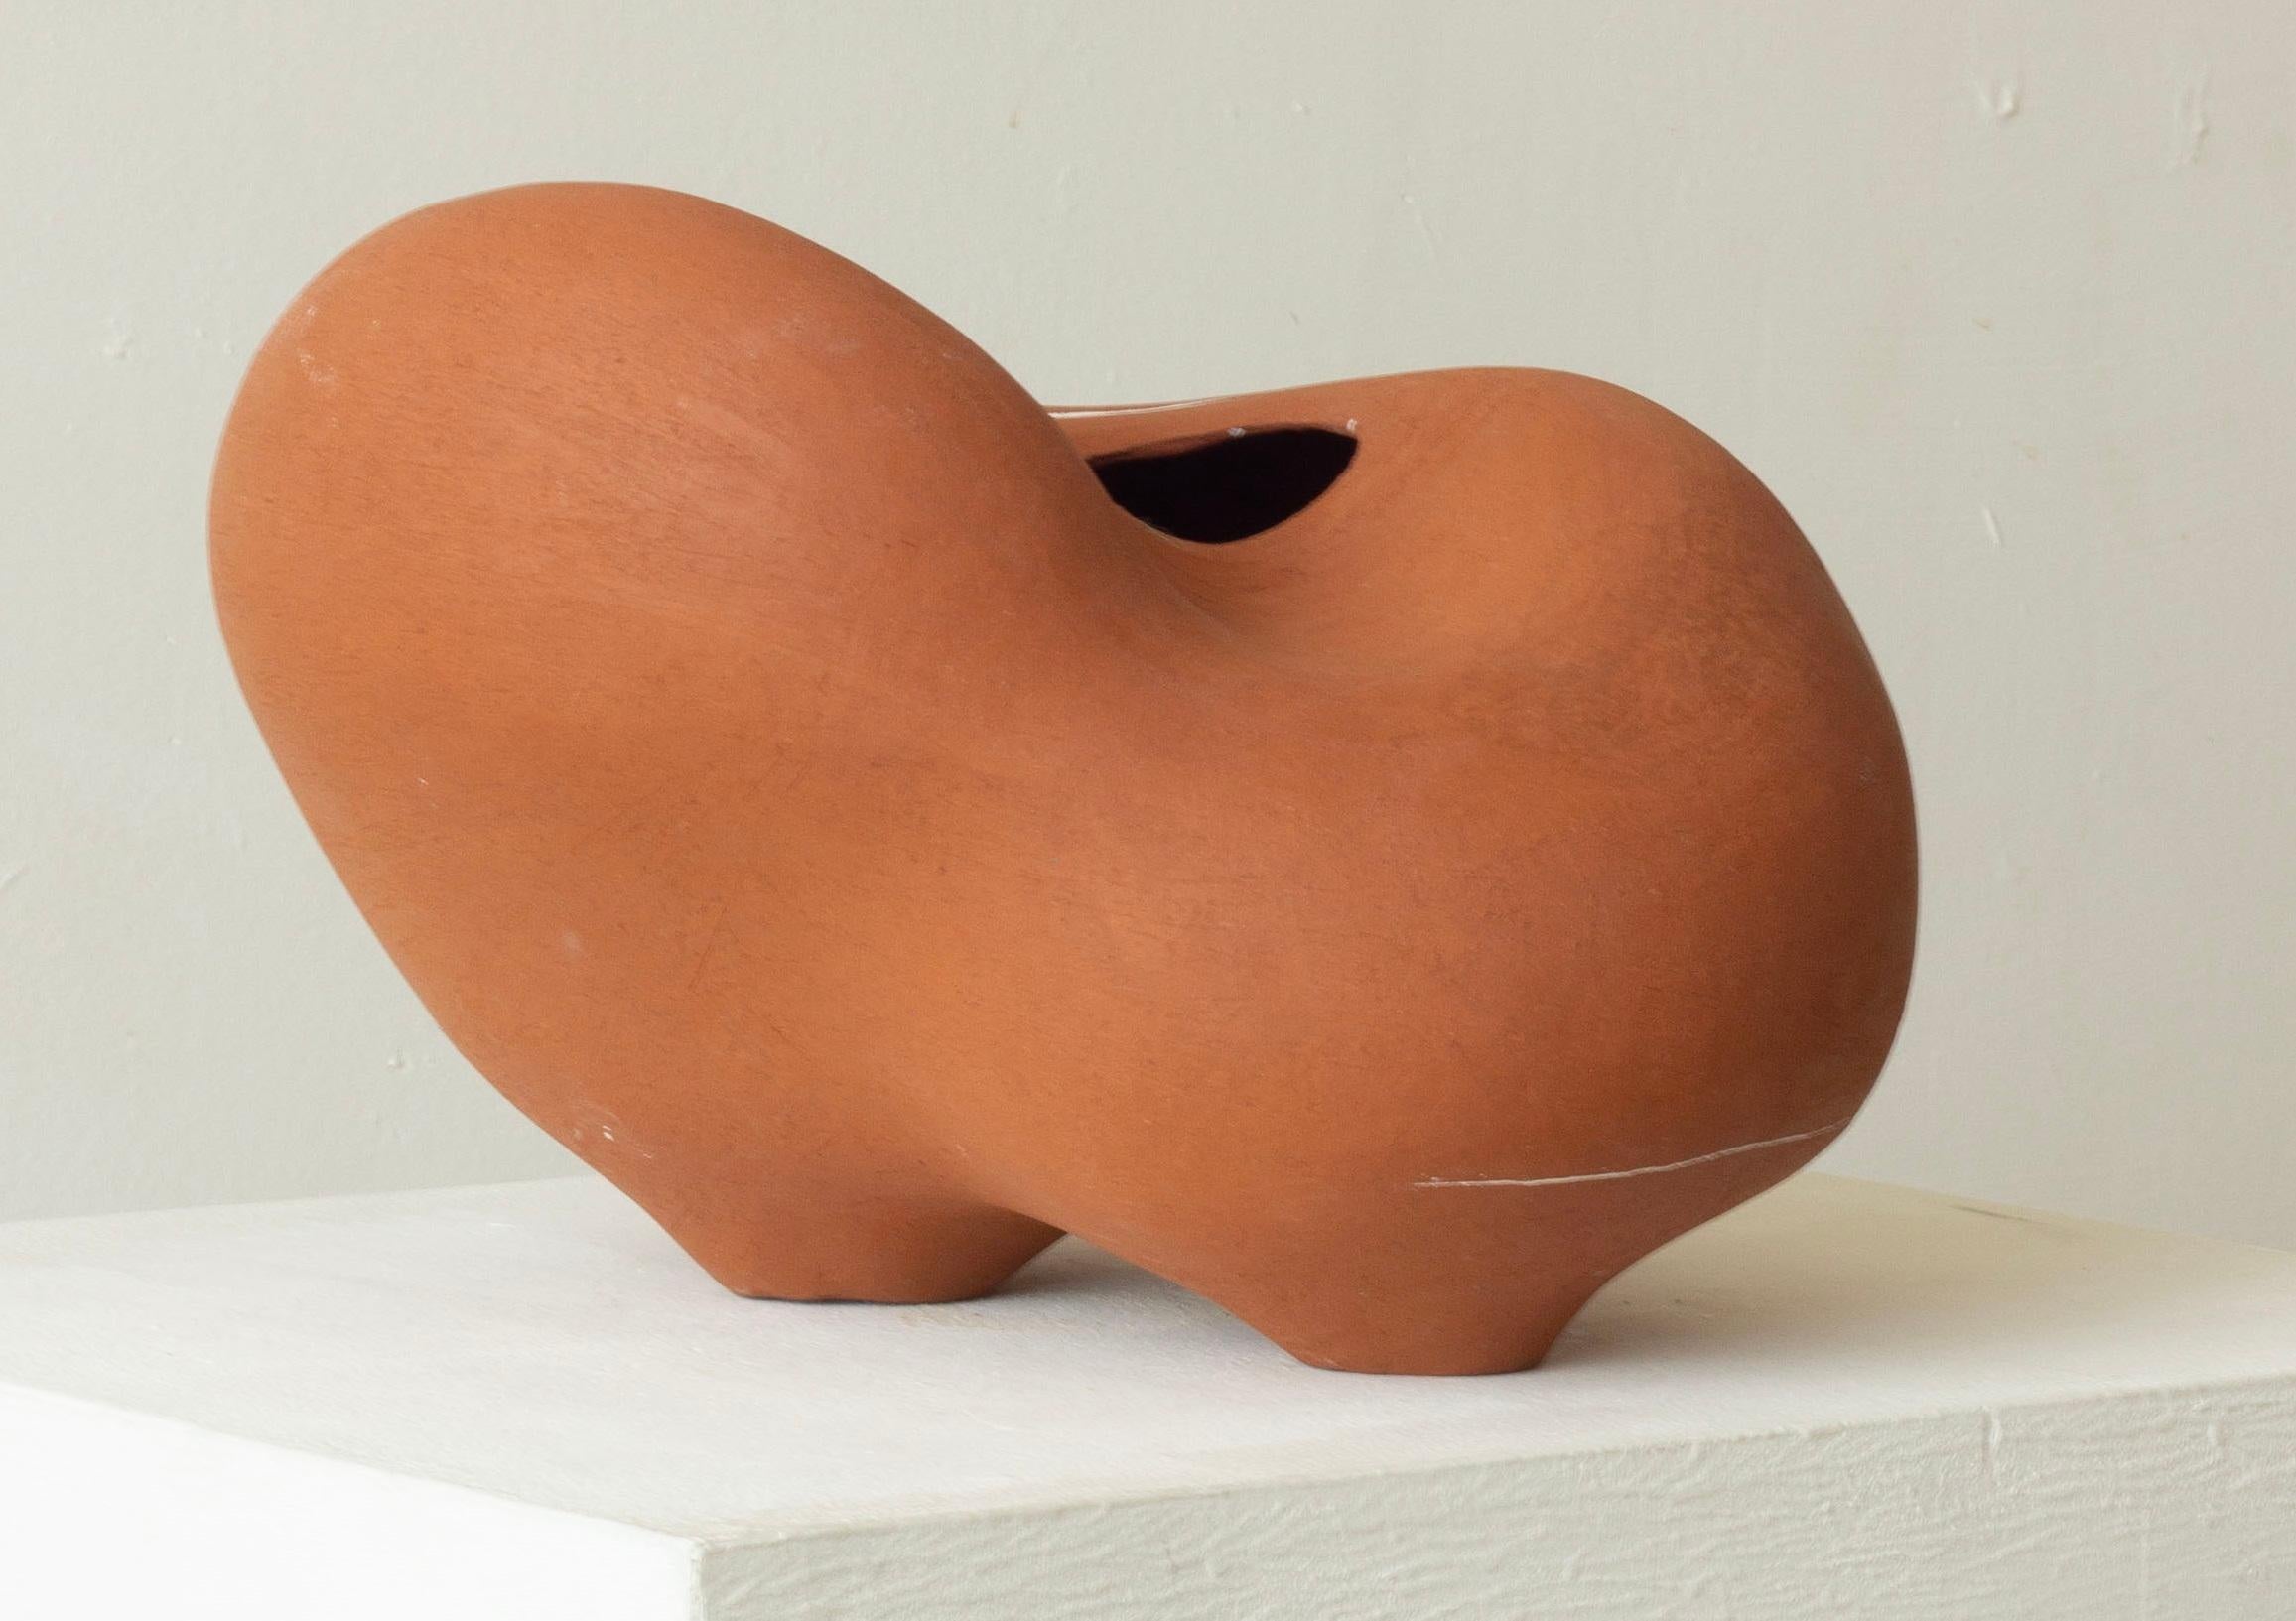 Woman Cracked But Healed 234 Vase by Karina Smagulova
One of a Kind.
Dimensions: Ø 33 x H 24 cm.
Materials: Terracotta and epoxy.
​
With an Armenian and Kazakhstan heritage, Karina Smagulova was born in Greece in 1995 and graduated with a diploma in